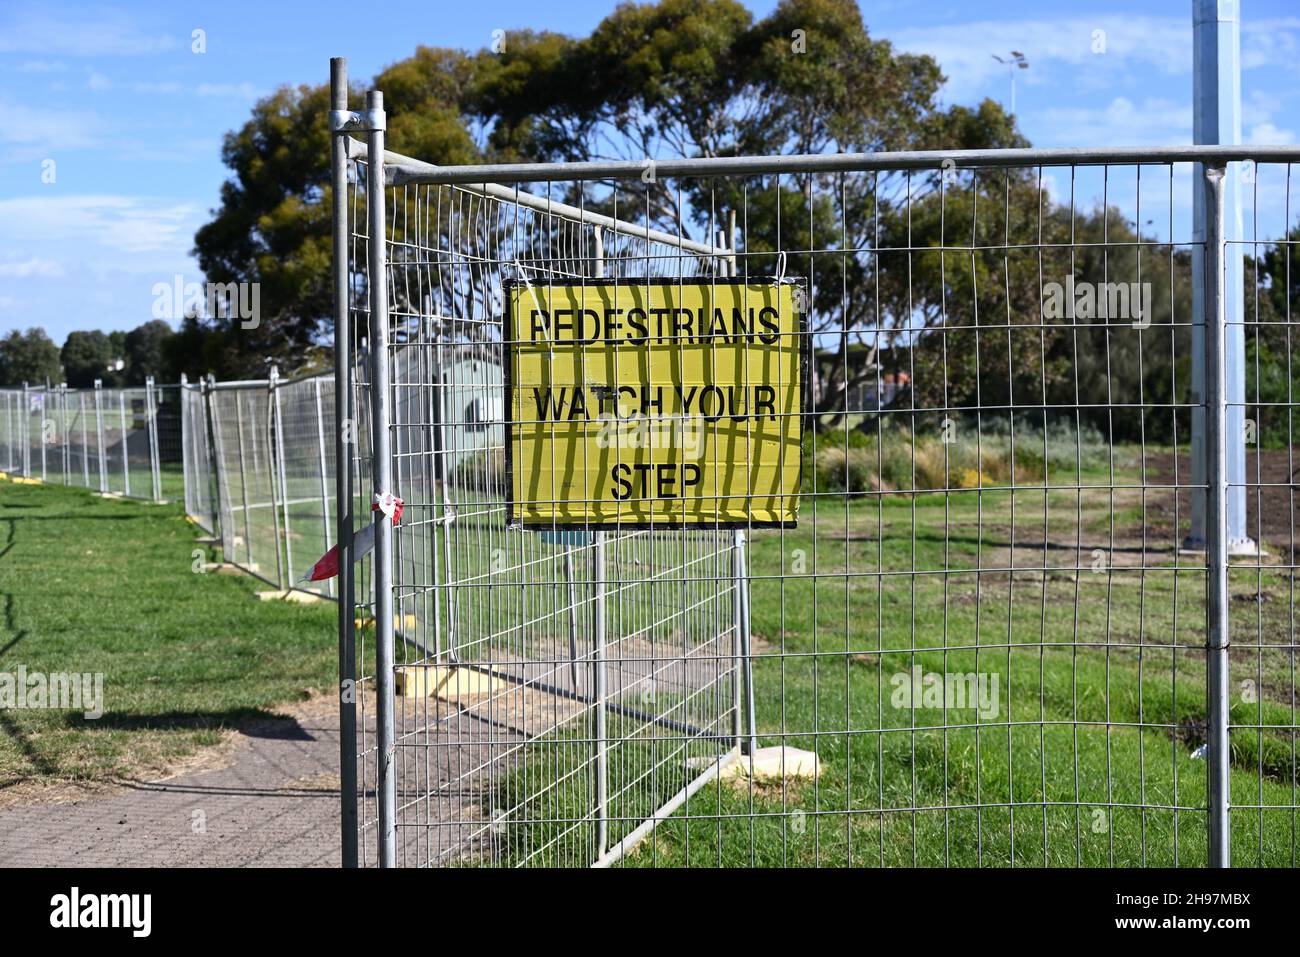 A yellow pedestrians watch your step sign, with black text, attached to a metal fence in a park Stock Photo